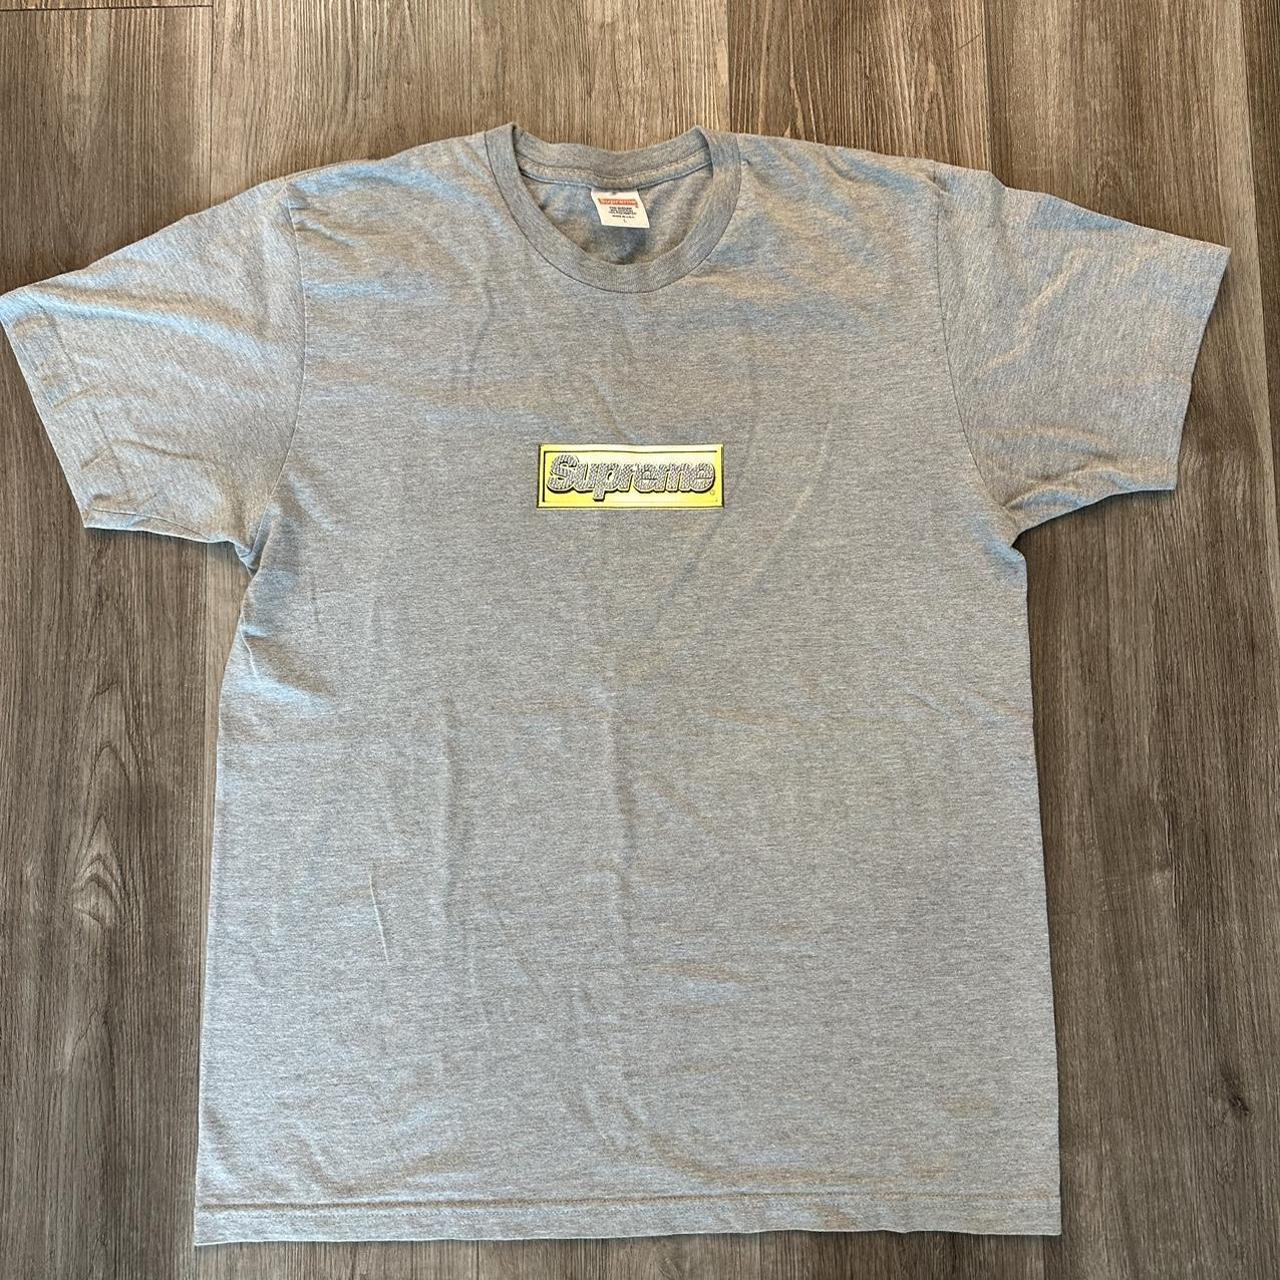 Supreme Bling Box Logo Tee Perfect Condition Depop, 44% OFF